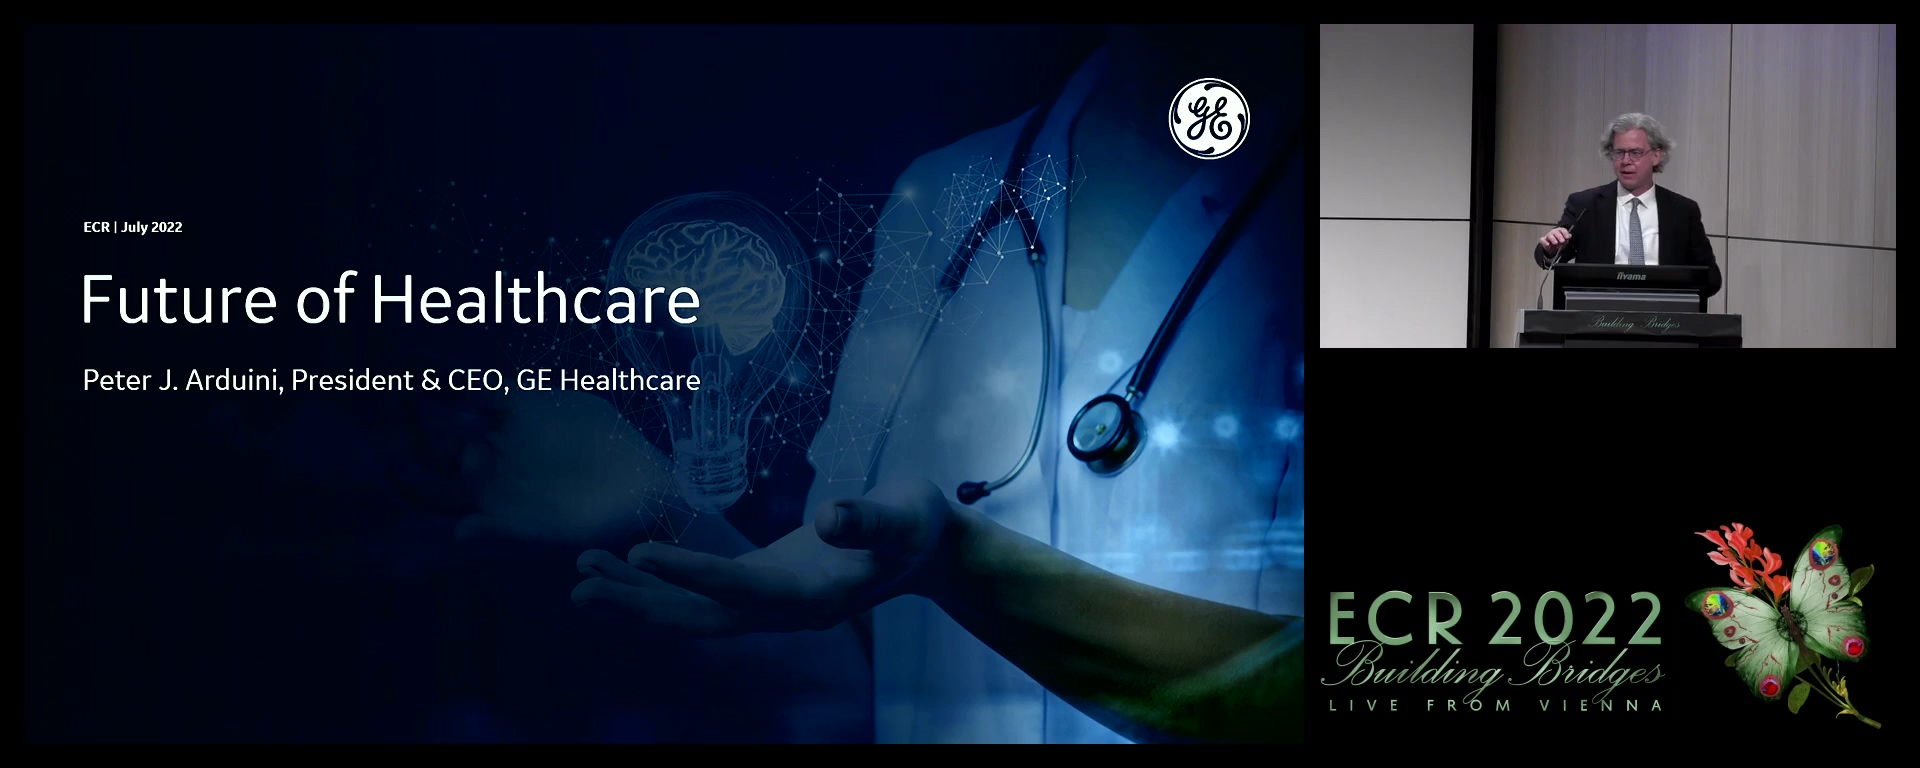 Future of Healthcare by Peter Arduini, President & CEO of GE Healthcare